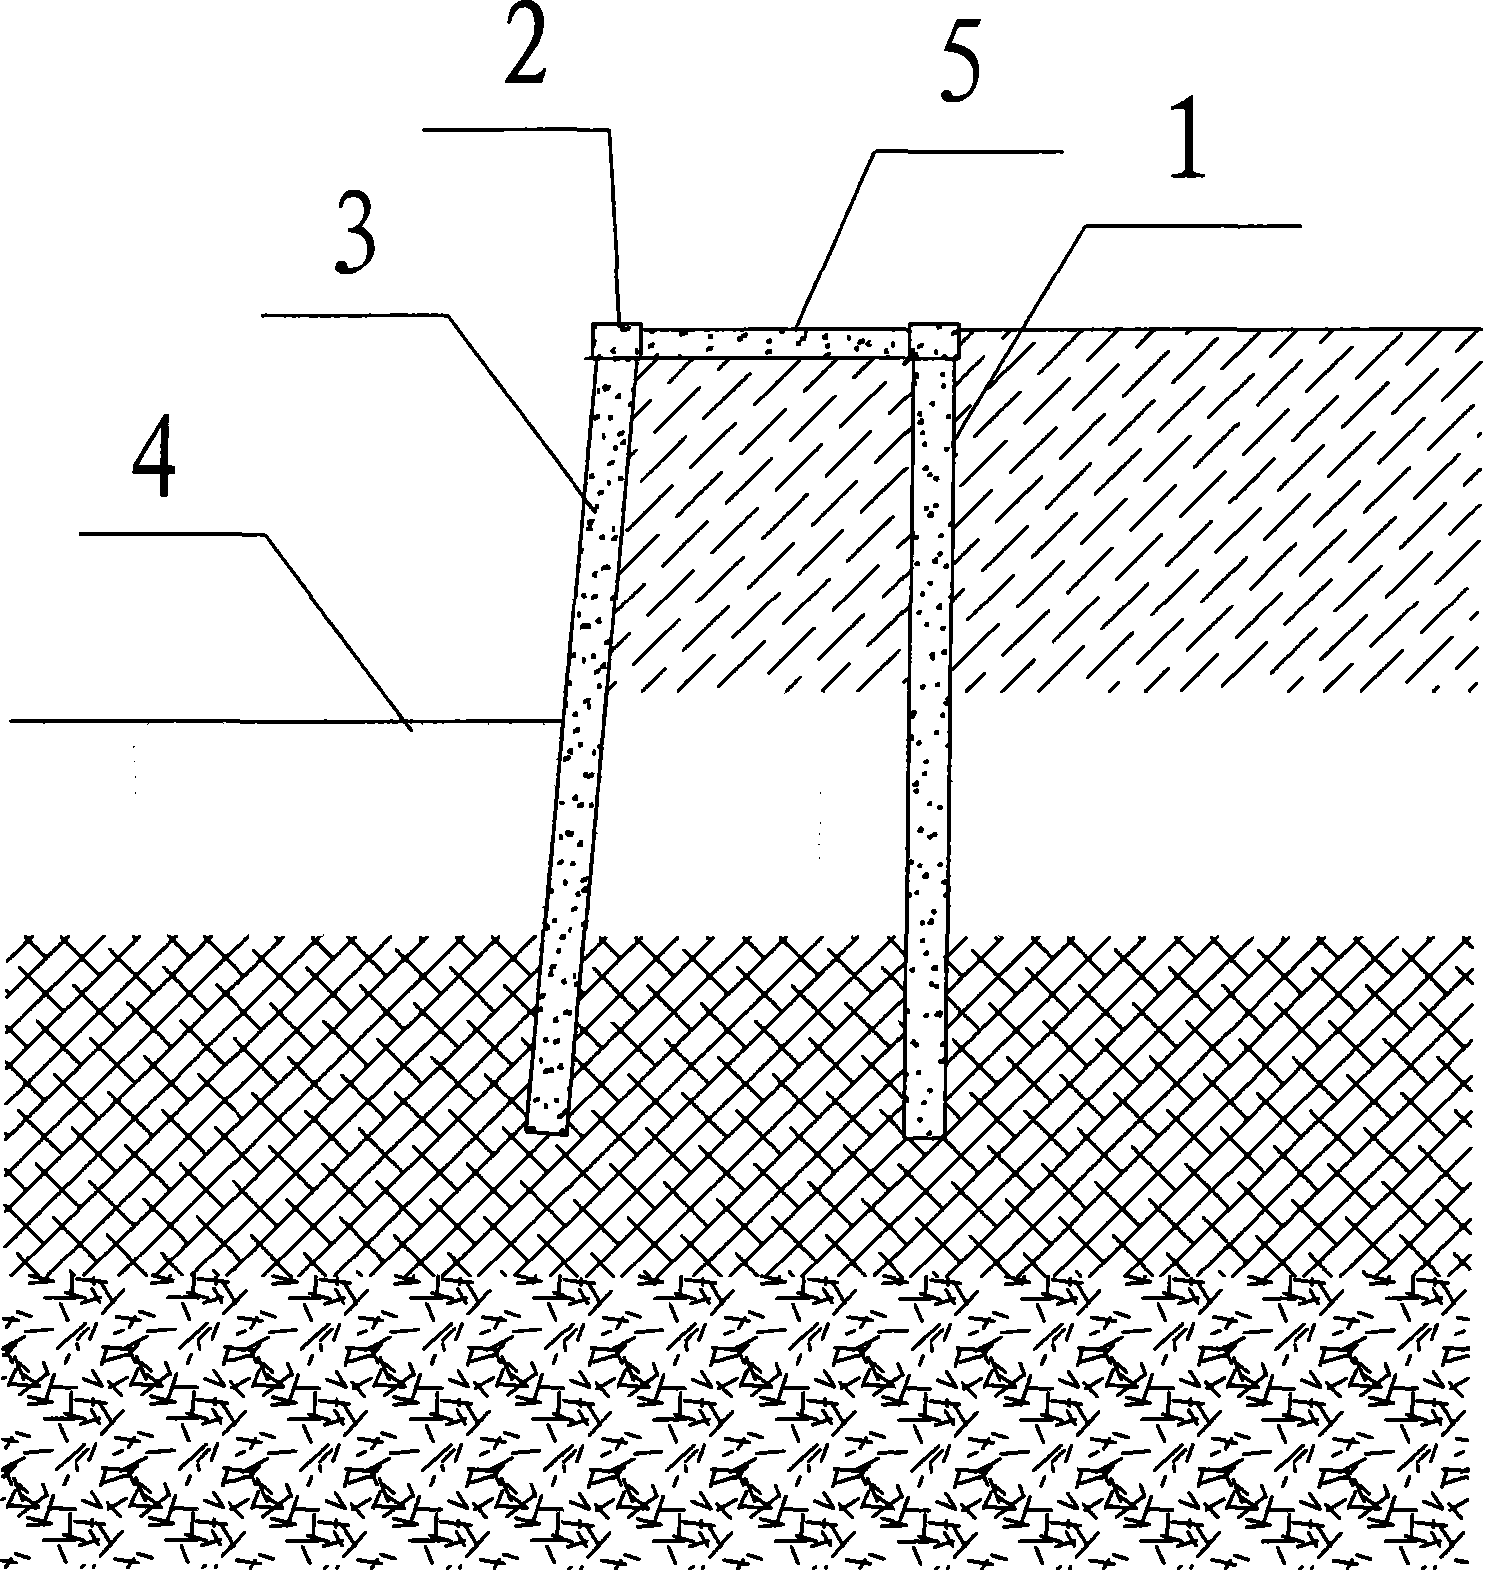 Foundation pit supporting method with double rows of piles